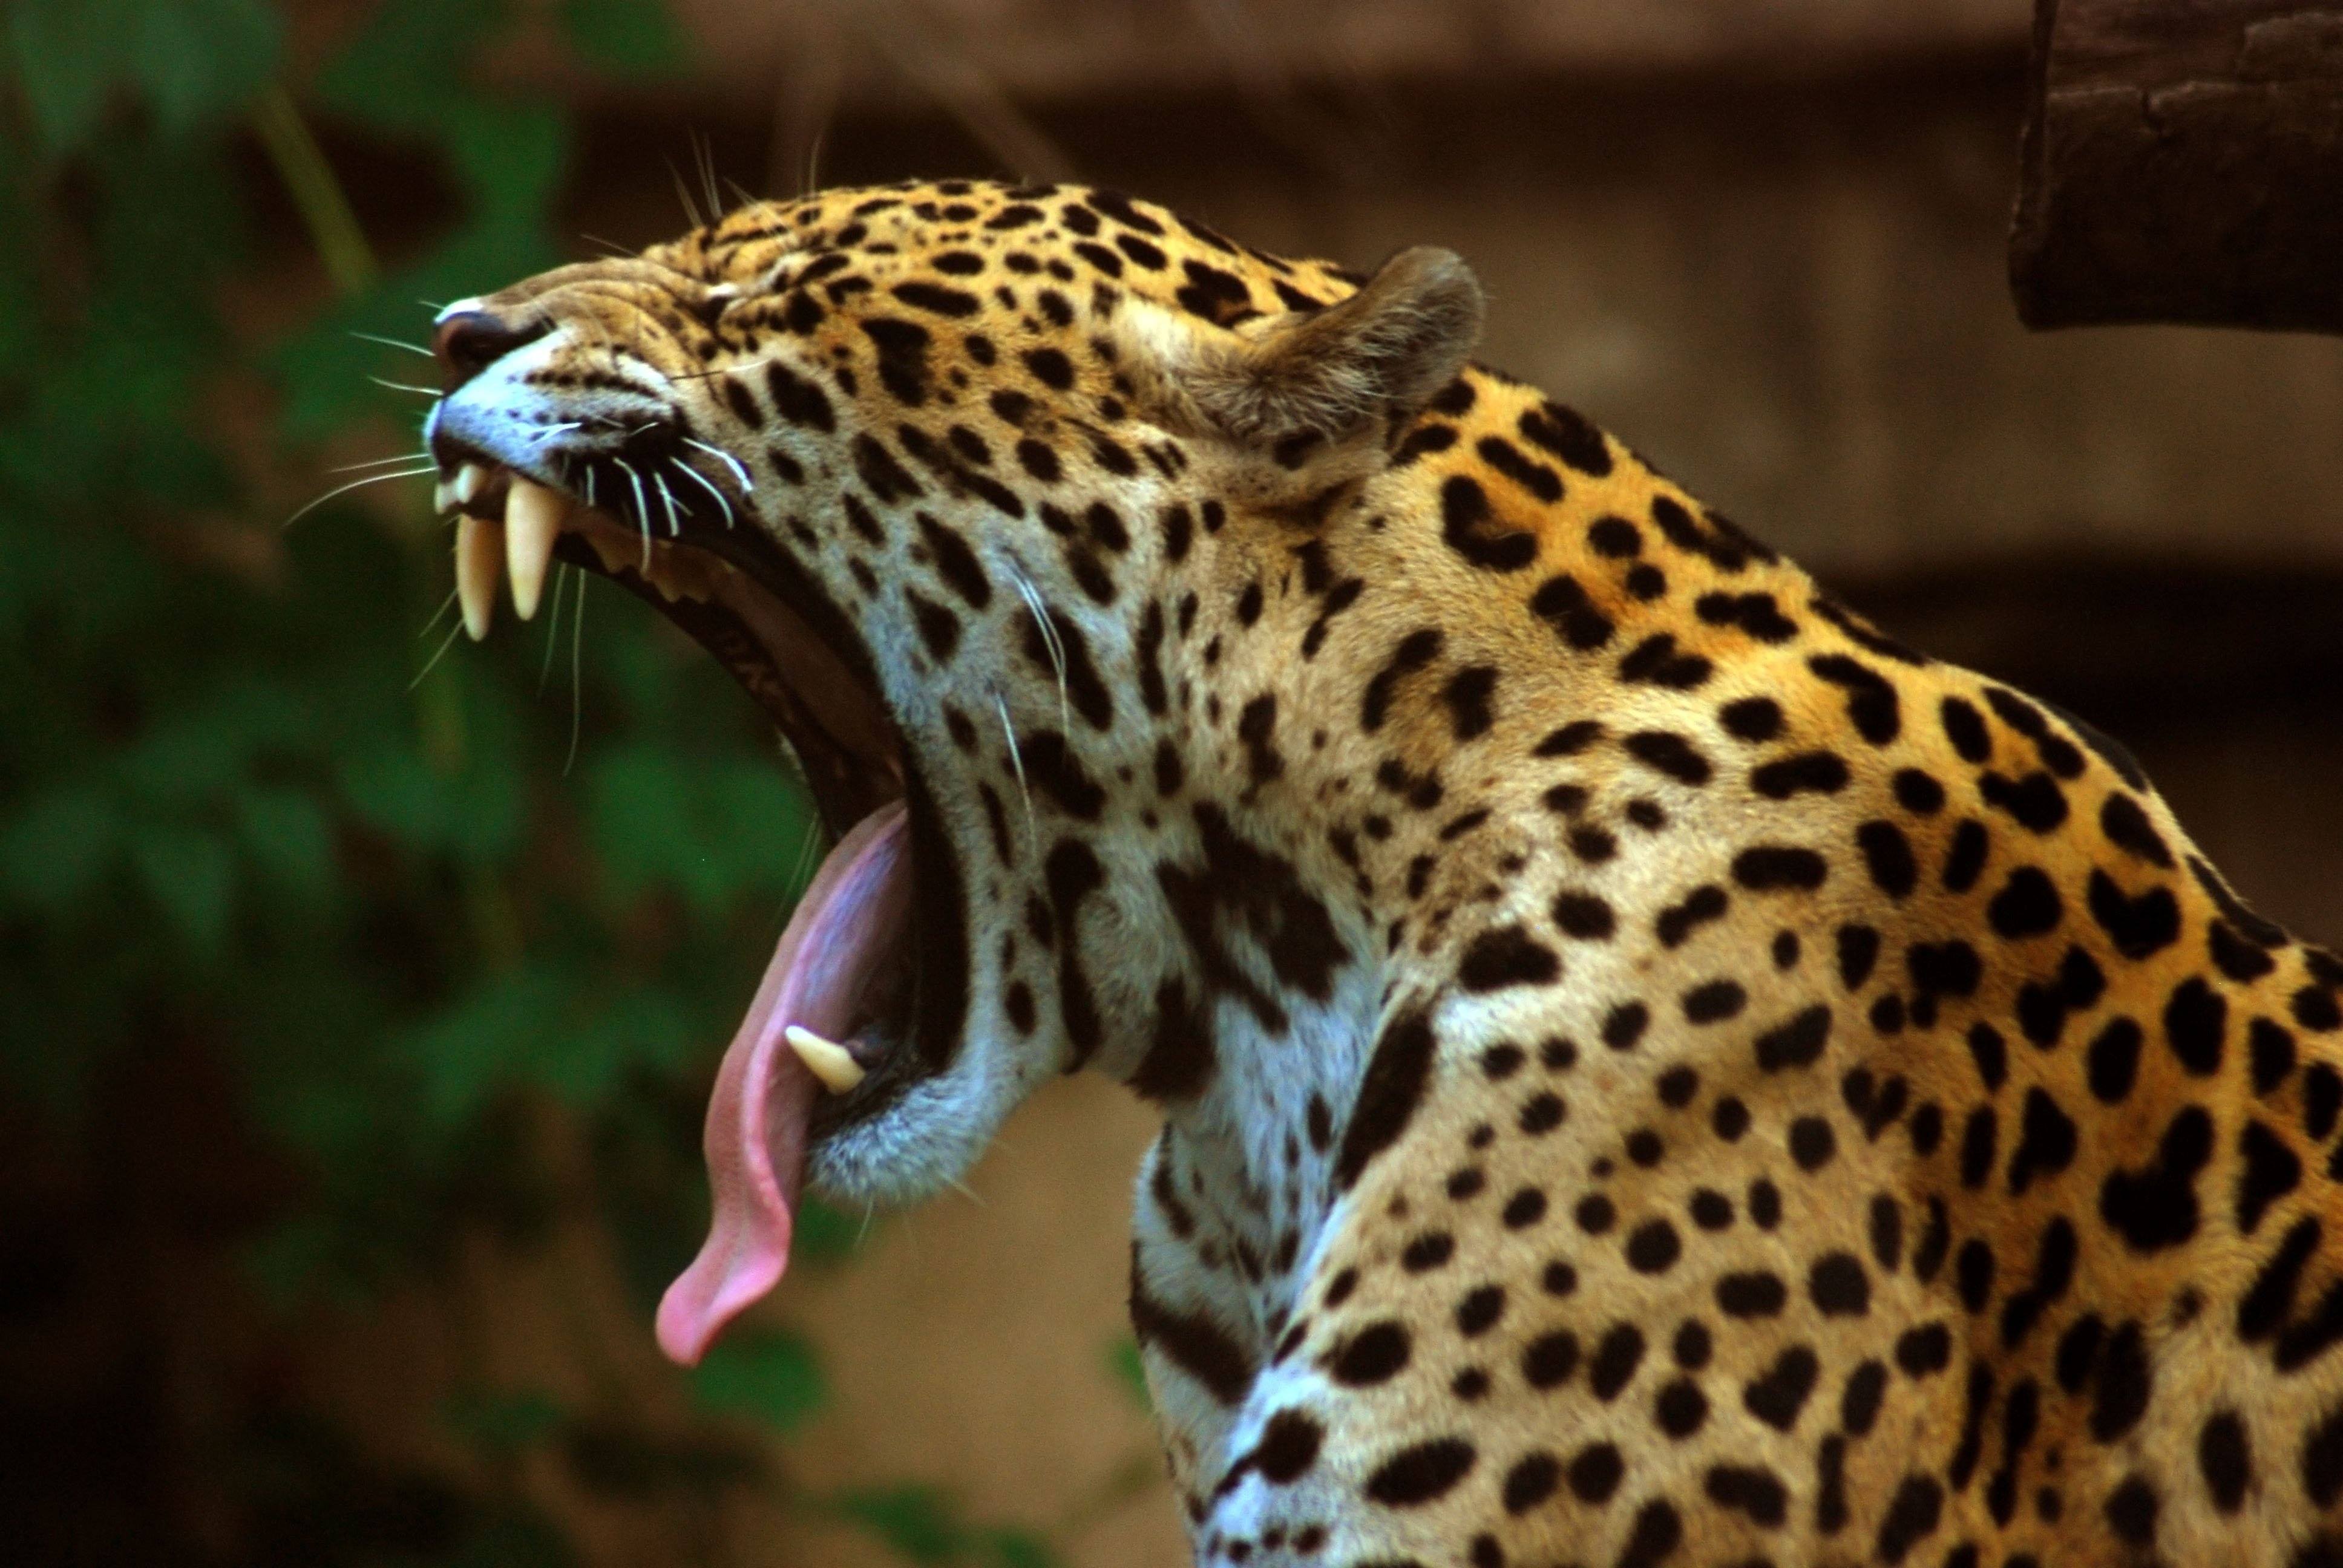 Jaguar yawning with mouth open wide